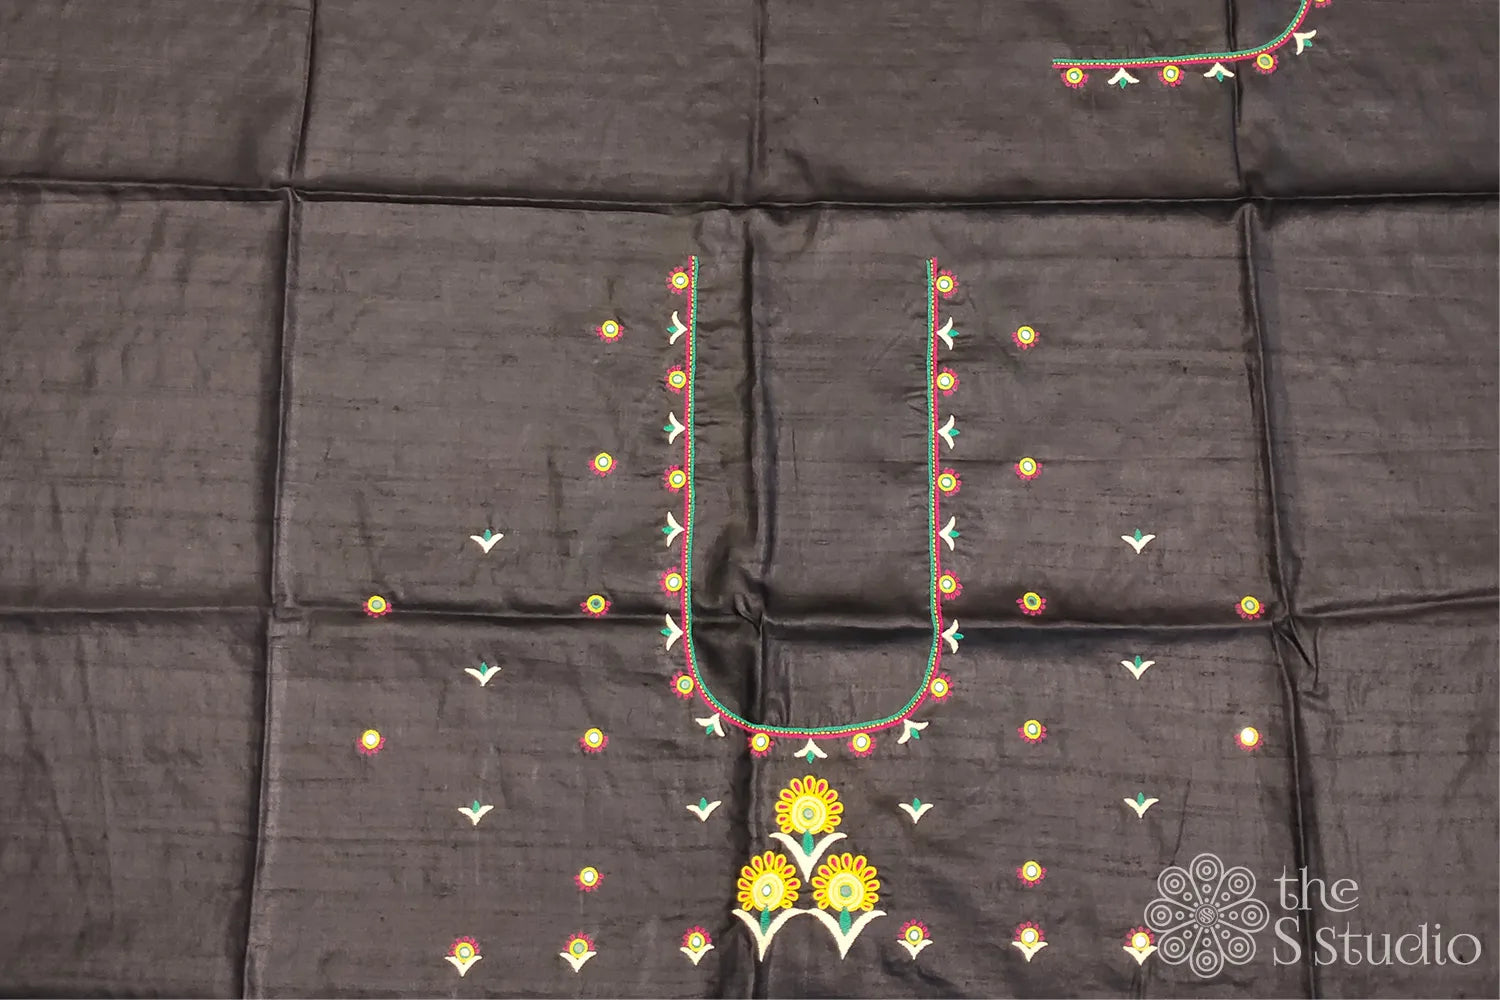 Black Tussar silk blouse material with kutch hand embroidery